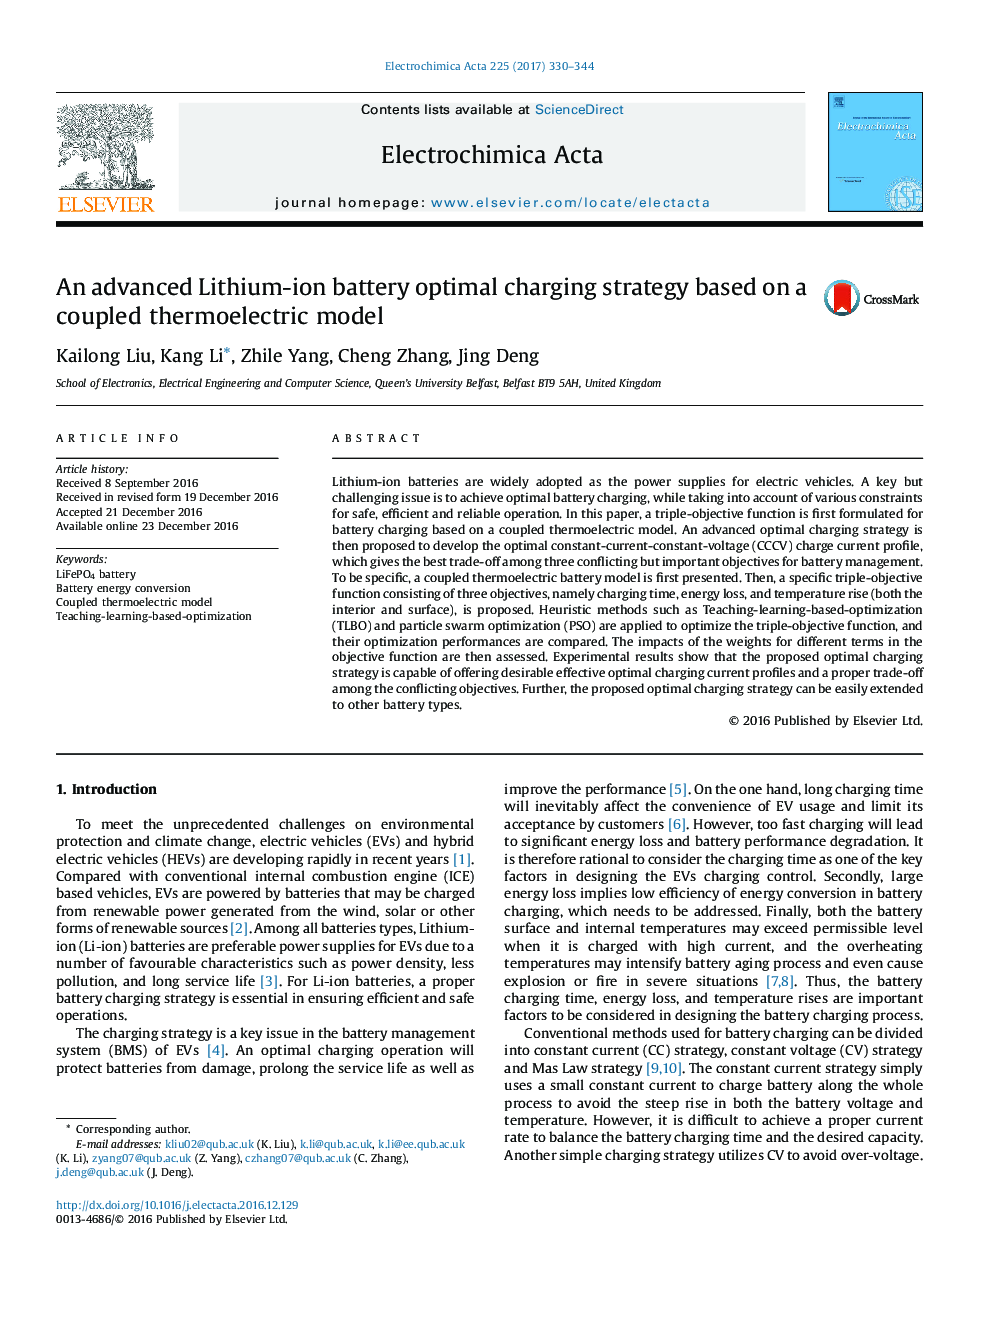 An advanced Lithium-ion battery optimal charging strategy based on a coupled thermoelectric model